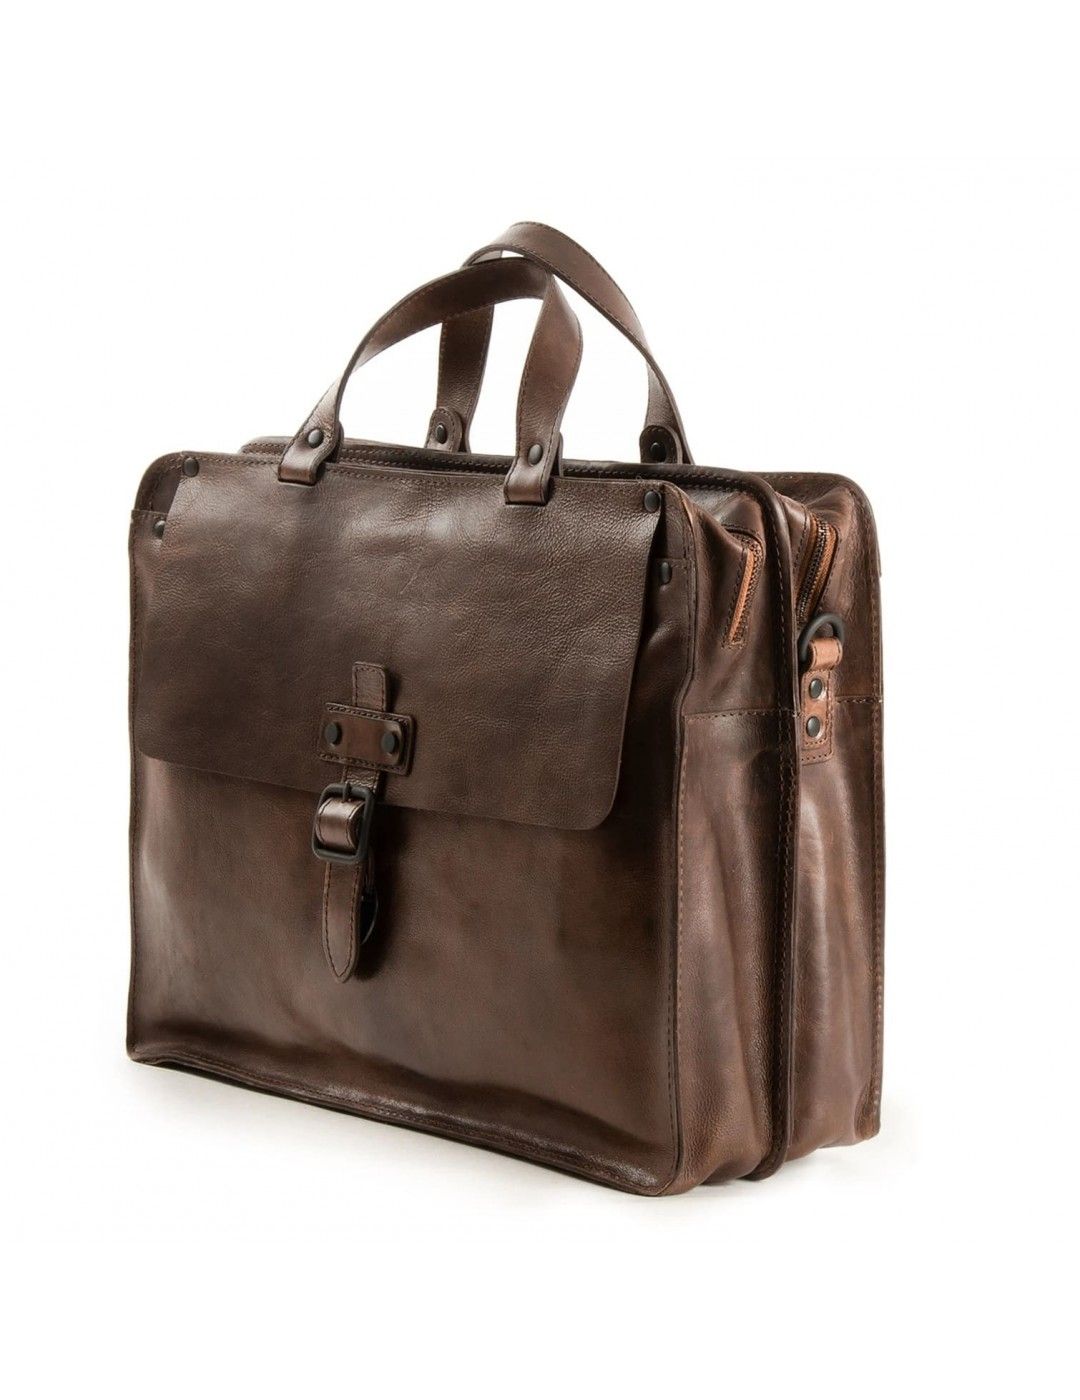 Harolds Aberdeen business bag twin brown leather